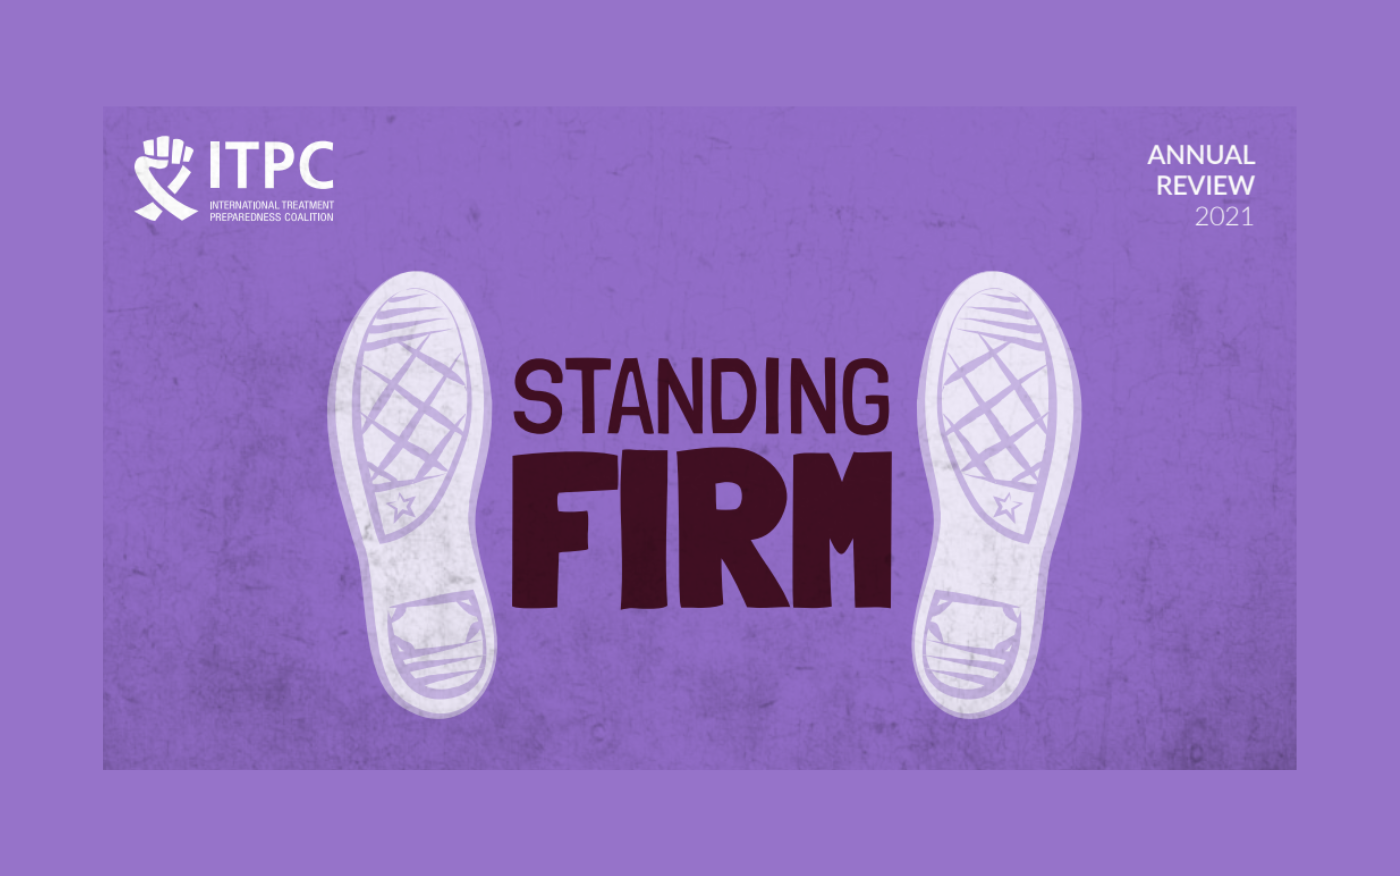 itpc global annual review 2021 standing firm report